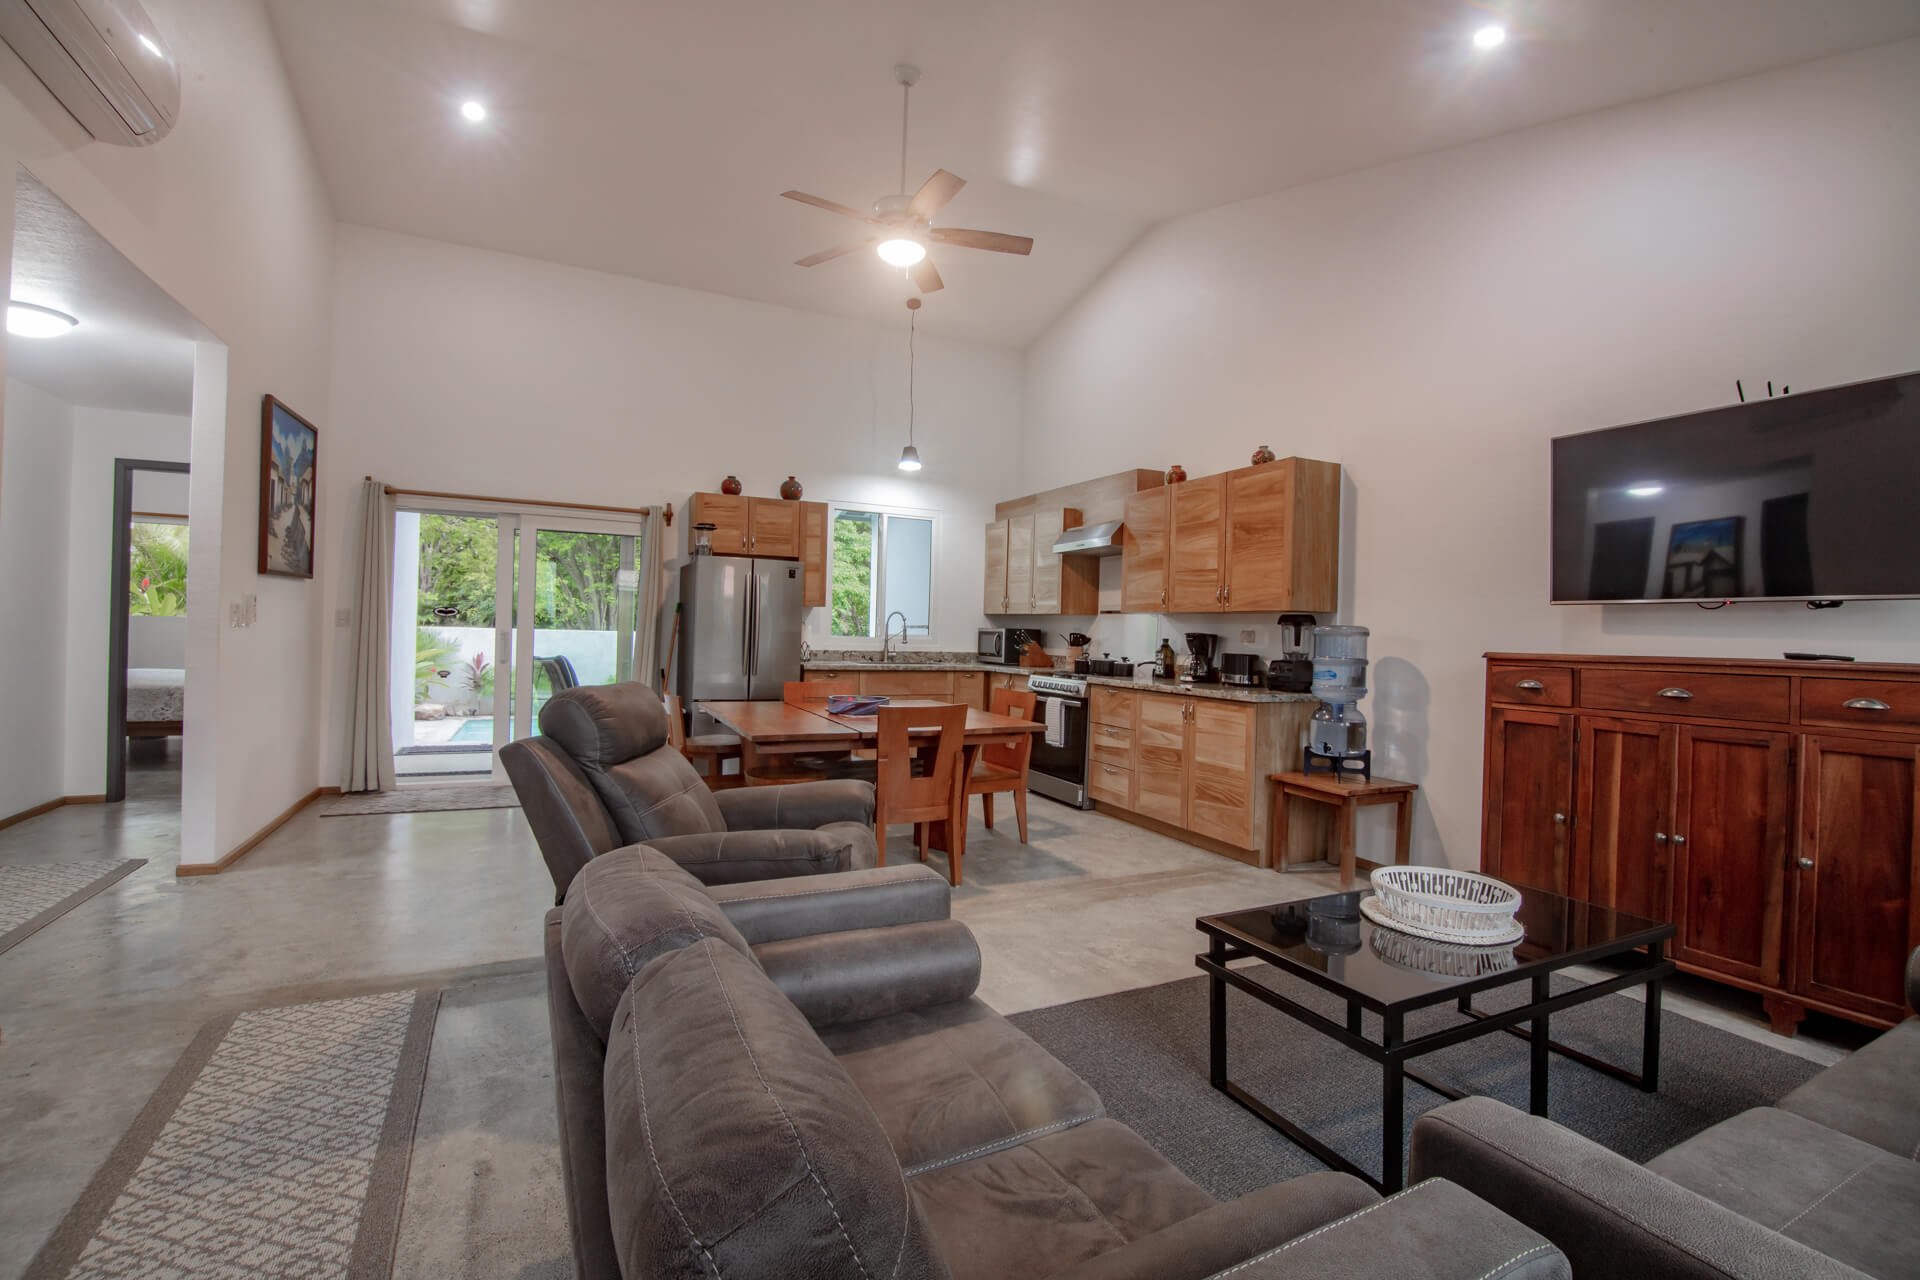 Spacious Living Room at Casita U22: Perfect for Relaxing and Entertaining